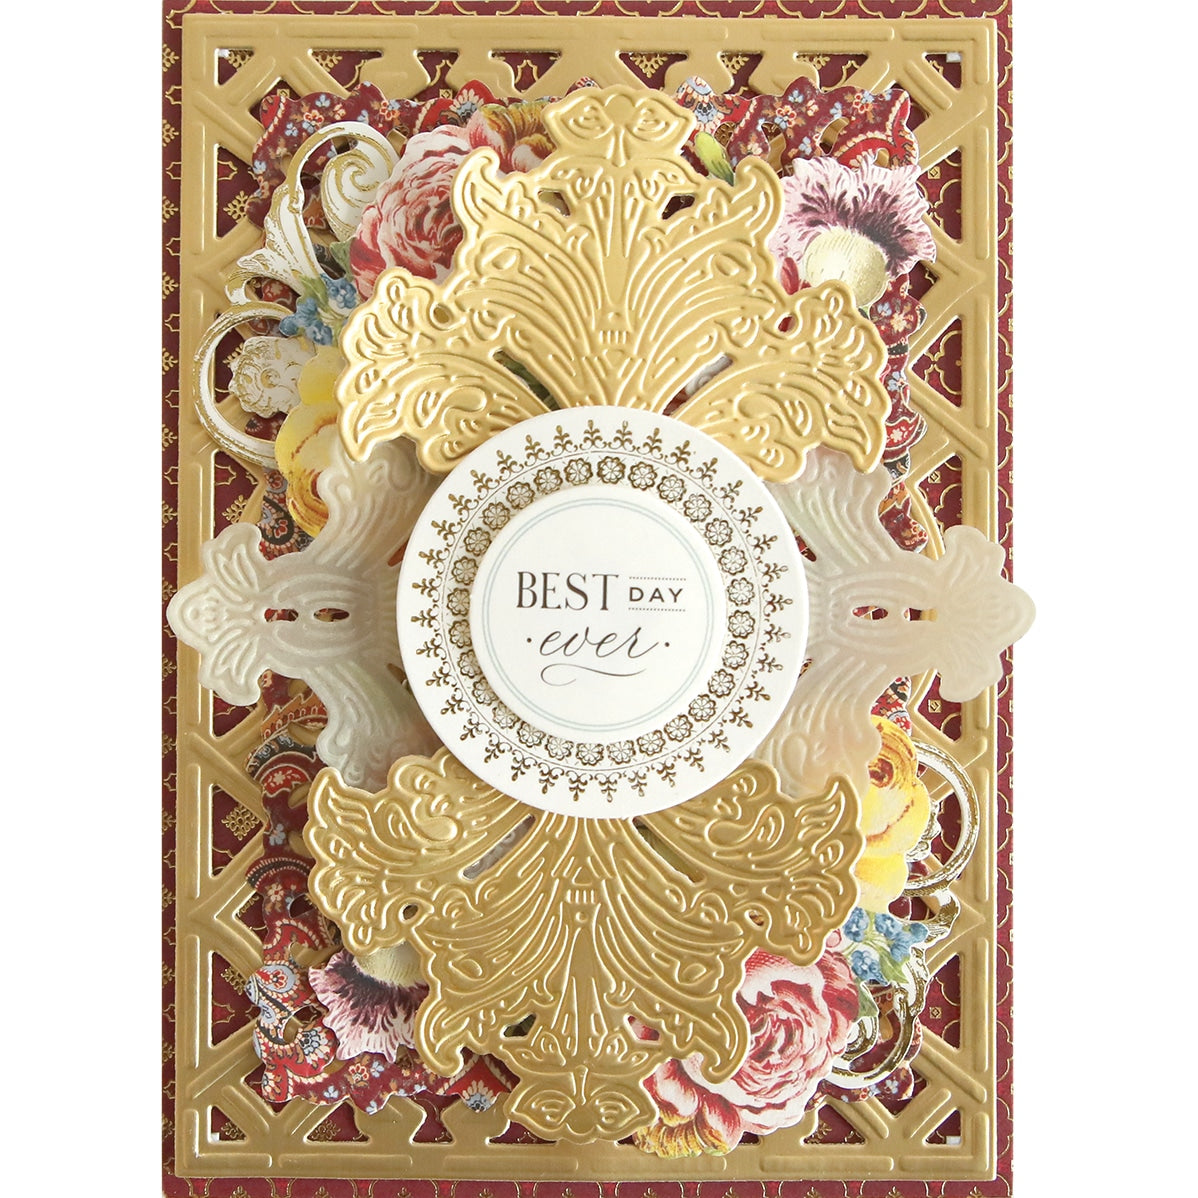 a card with a gold and red design on it.